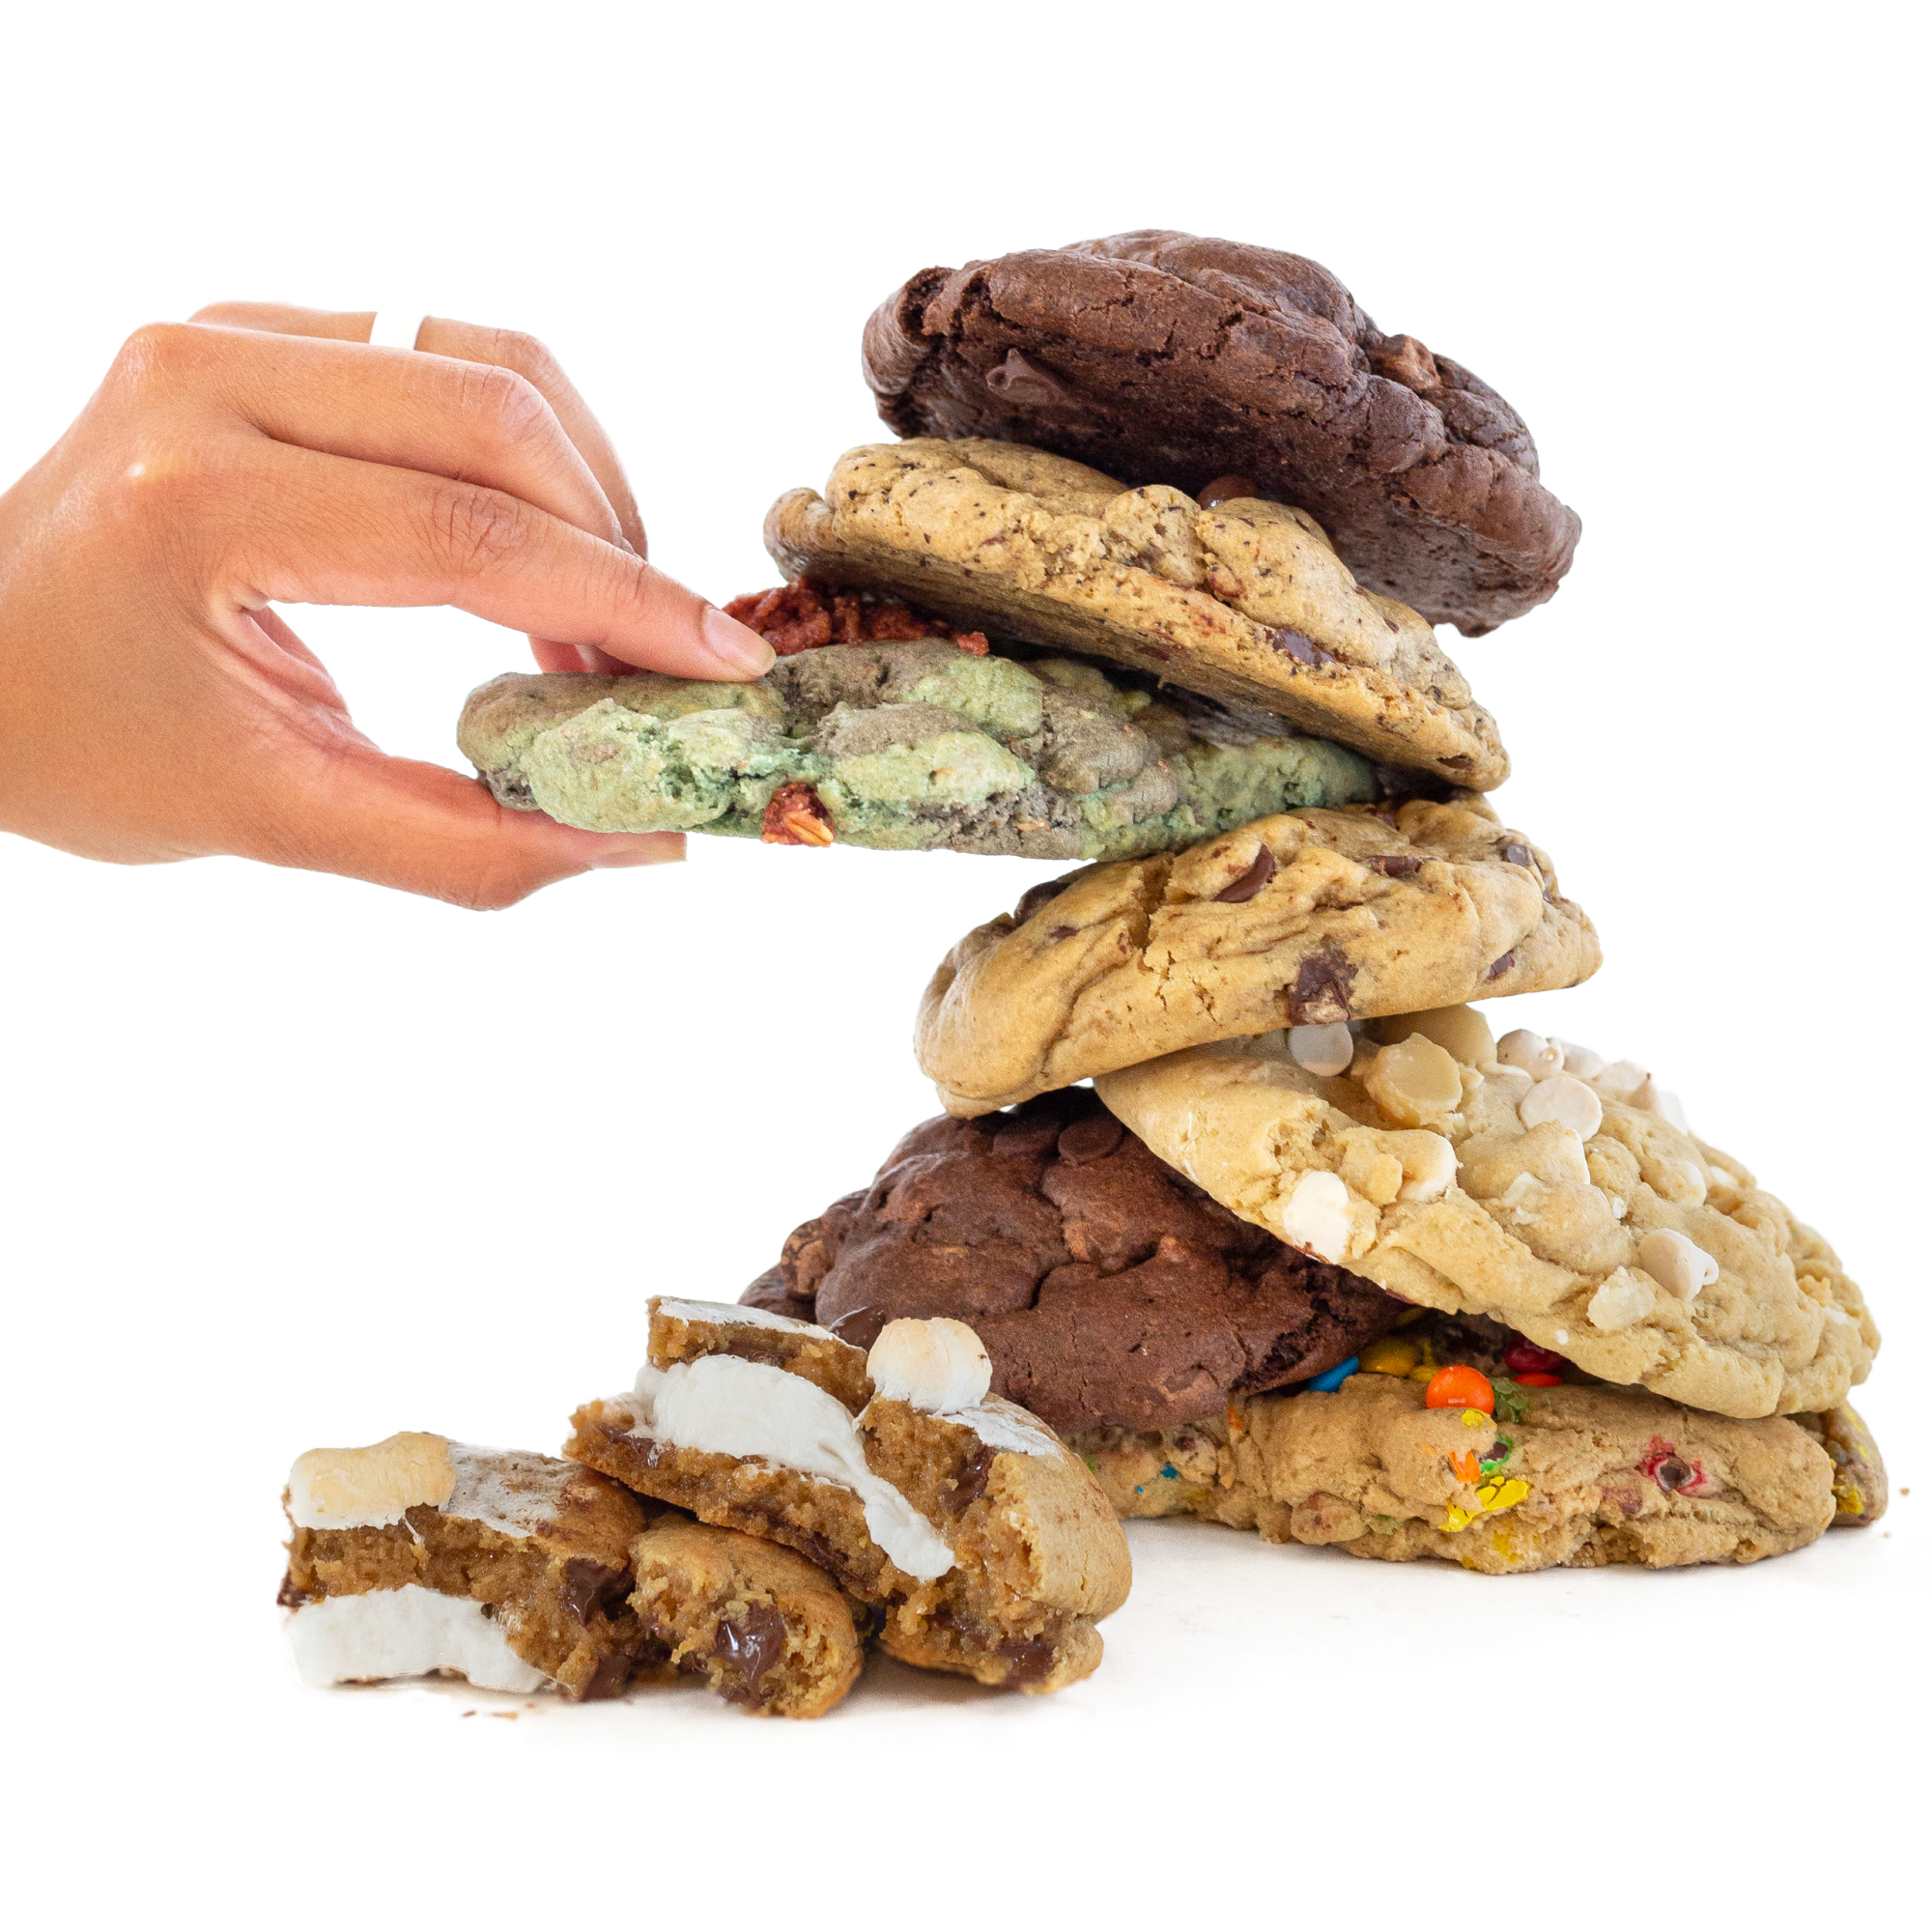 Is it Tree Nut Free M&m's Crunchy Cookie Chocolate Candies